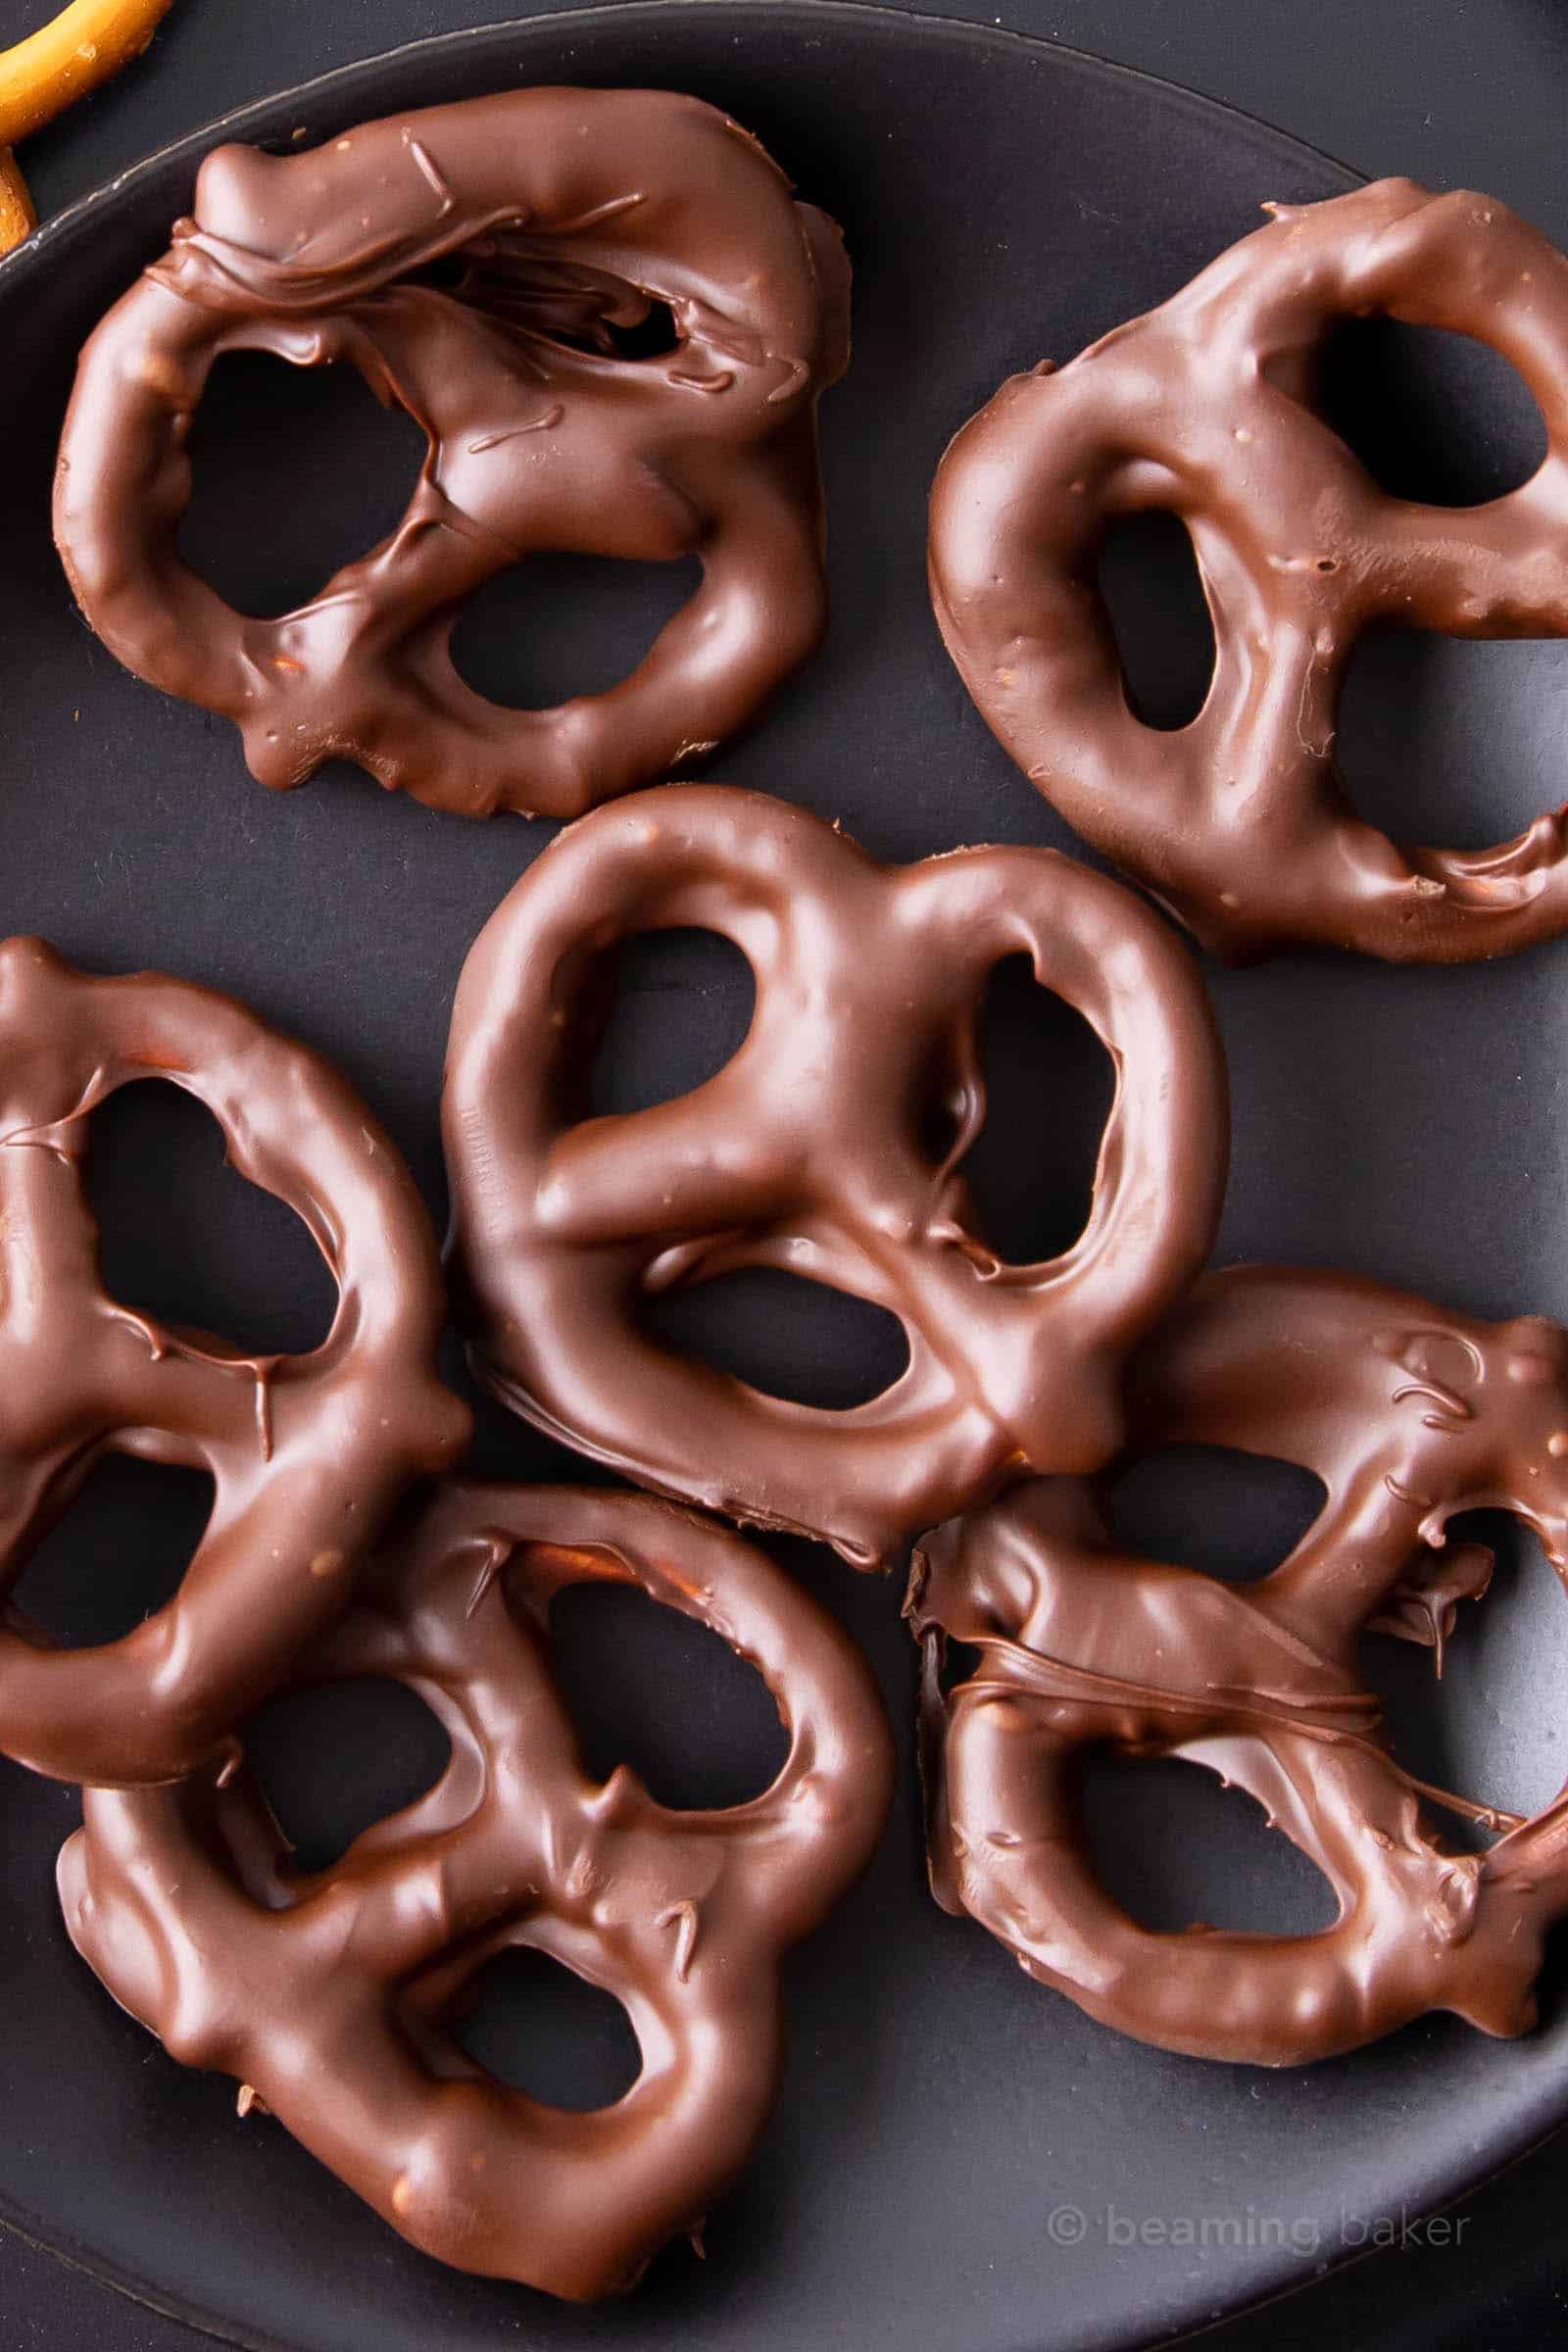 Closeup of vegan chocolate covered pretzels on a black plate with one uncovered pretzel showing